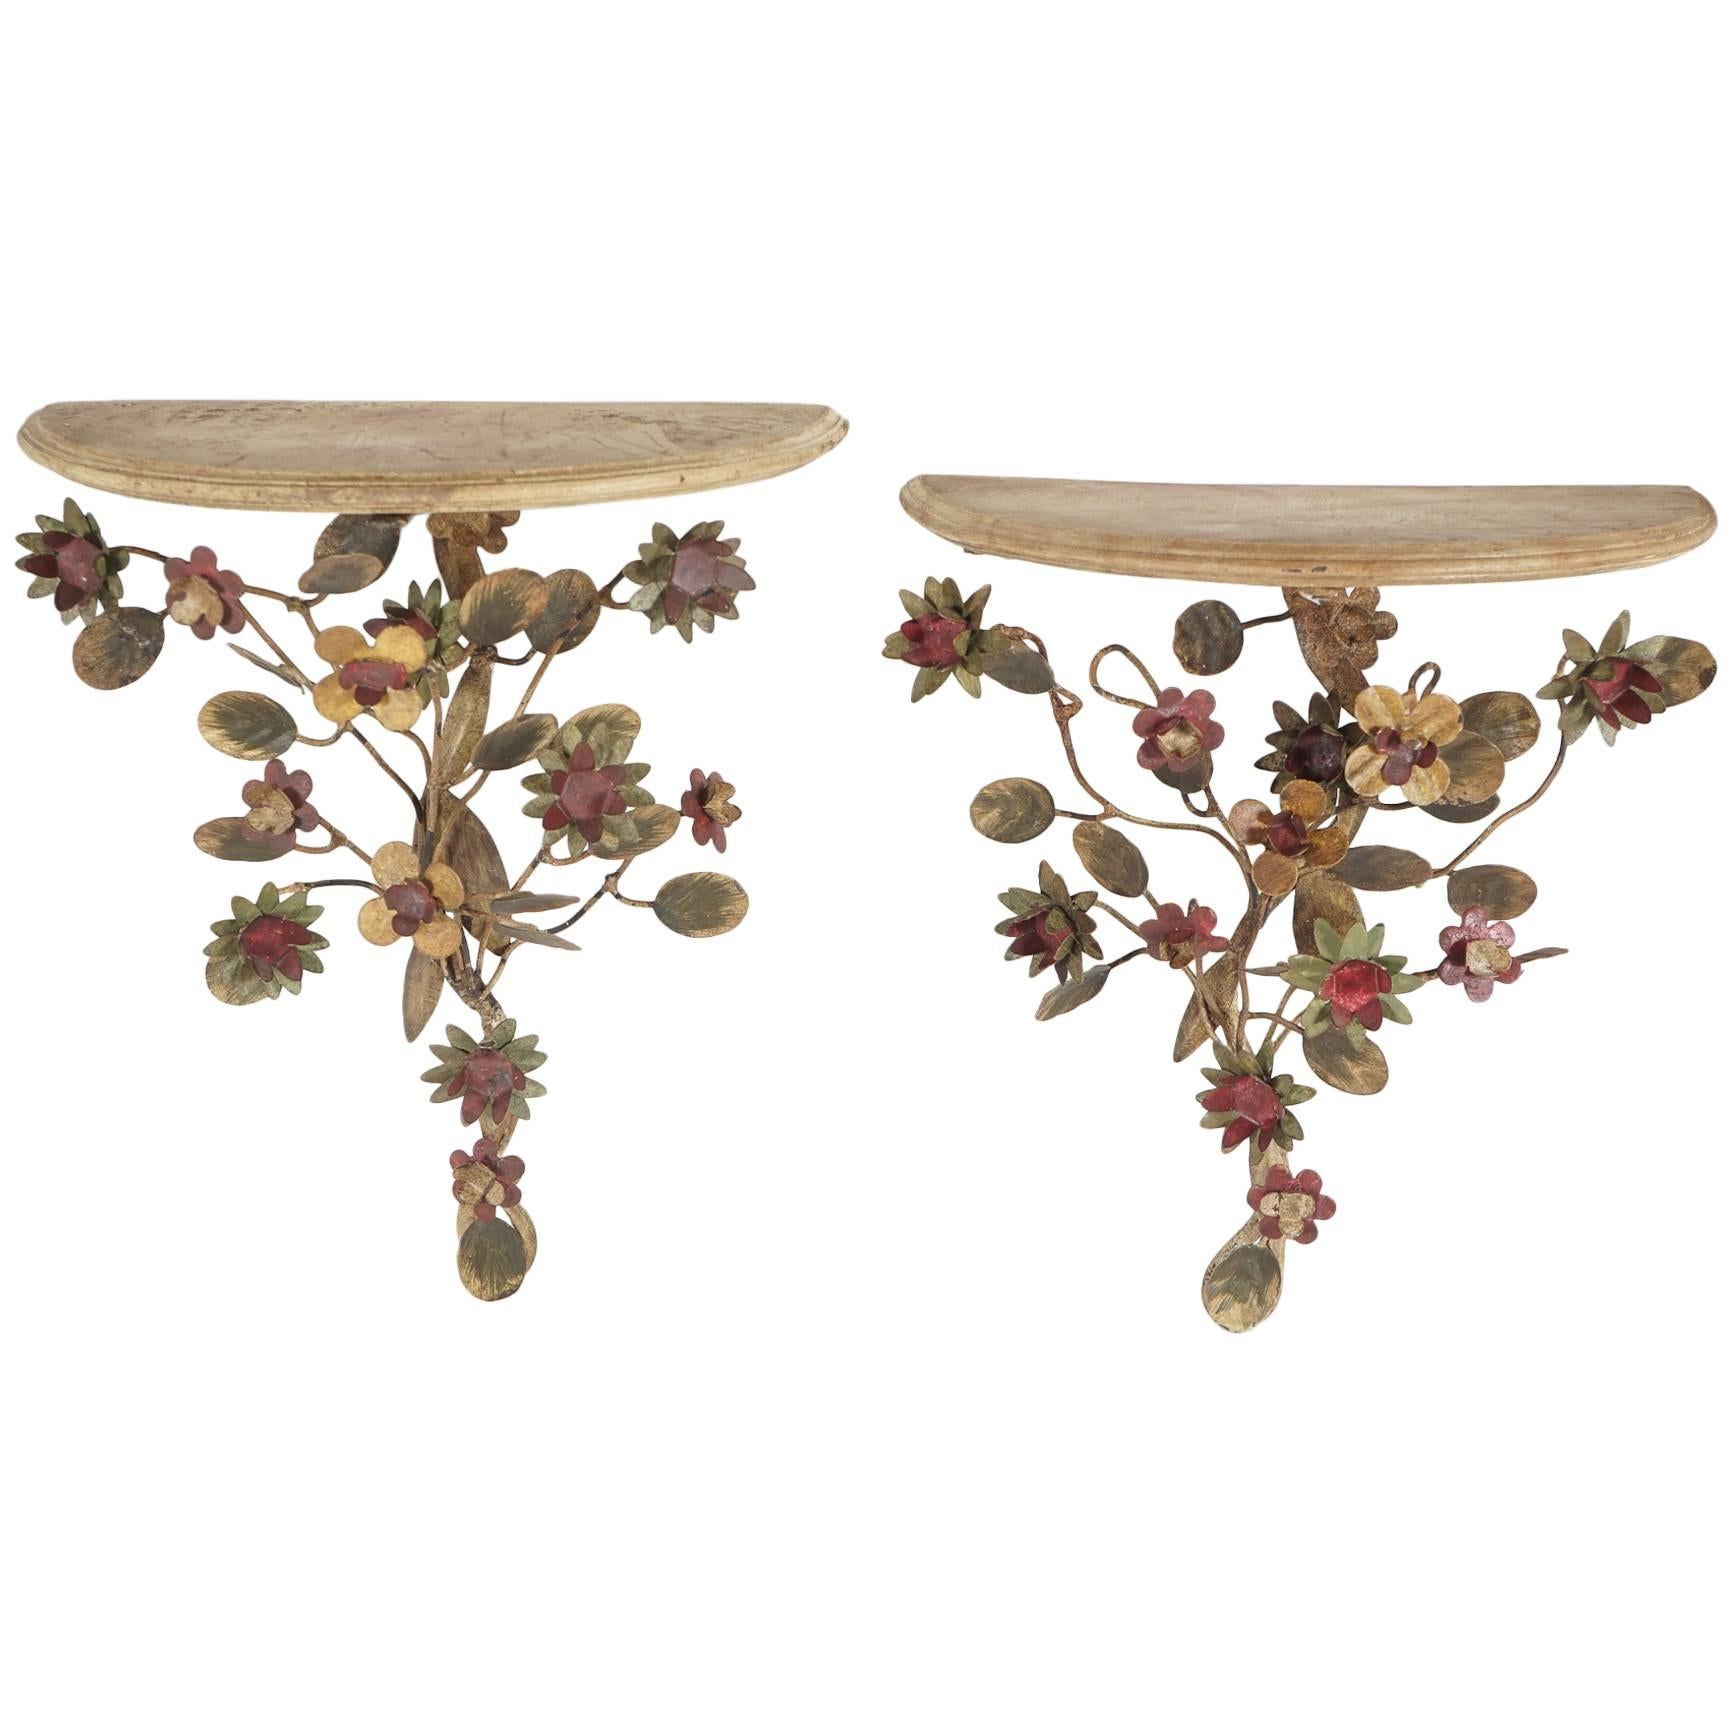 Vintage Tole Peinte Floral Wall Brackets from the Estate of Paul & Bunny Mellon